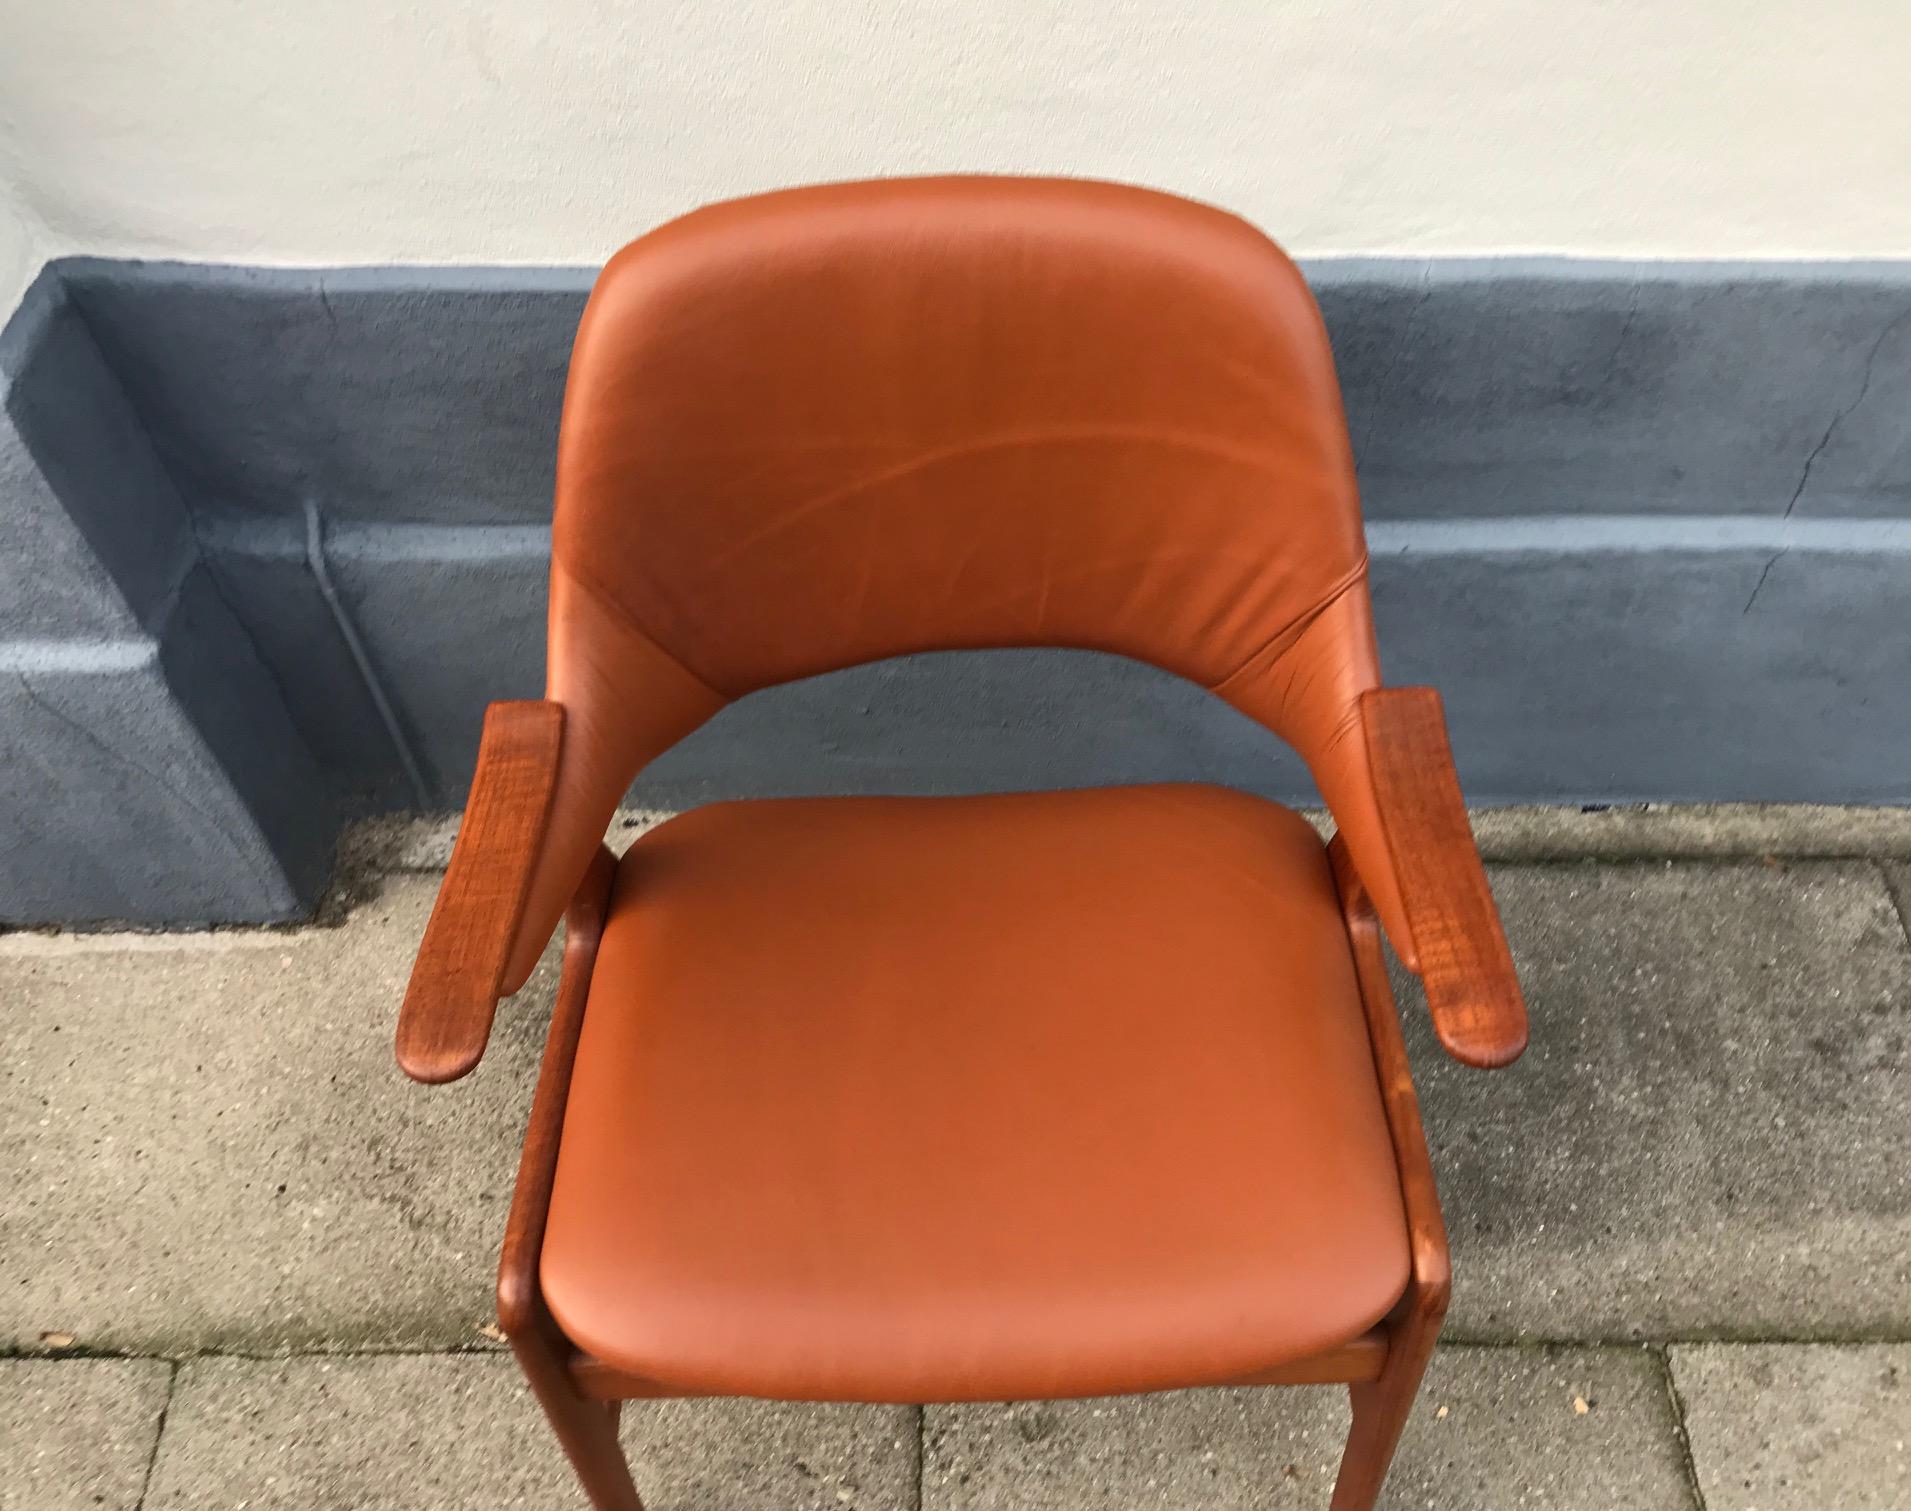 Danish Modern Teak and Leather Lounge Chair by N. A. Jørgensen, 1960s For Sale 5